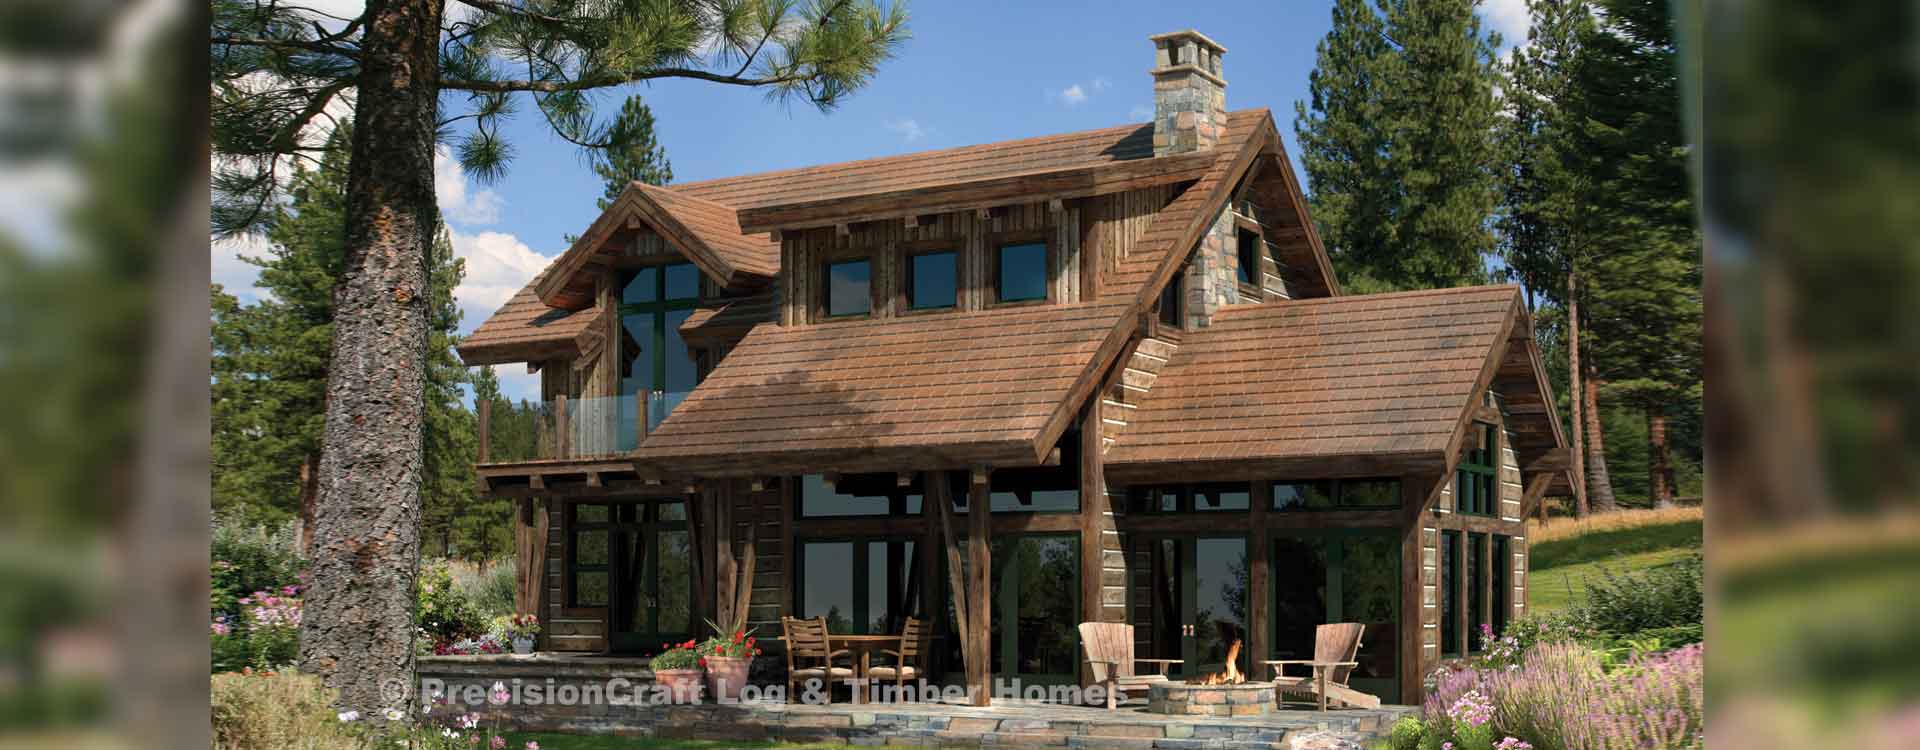 Clearwater timber home Rendering